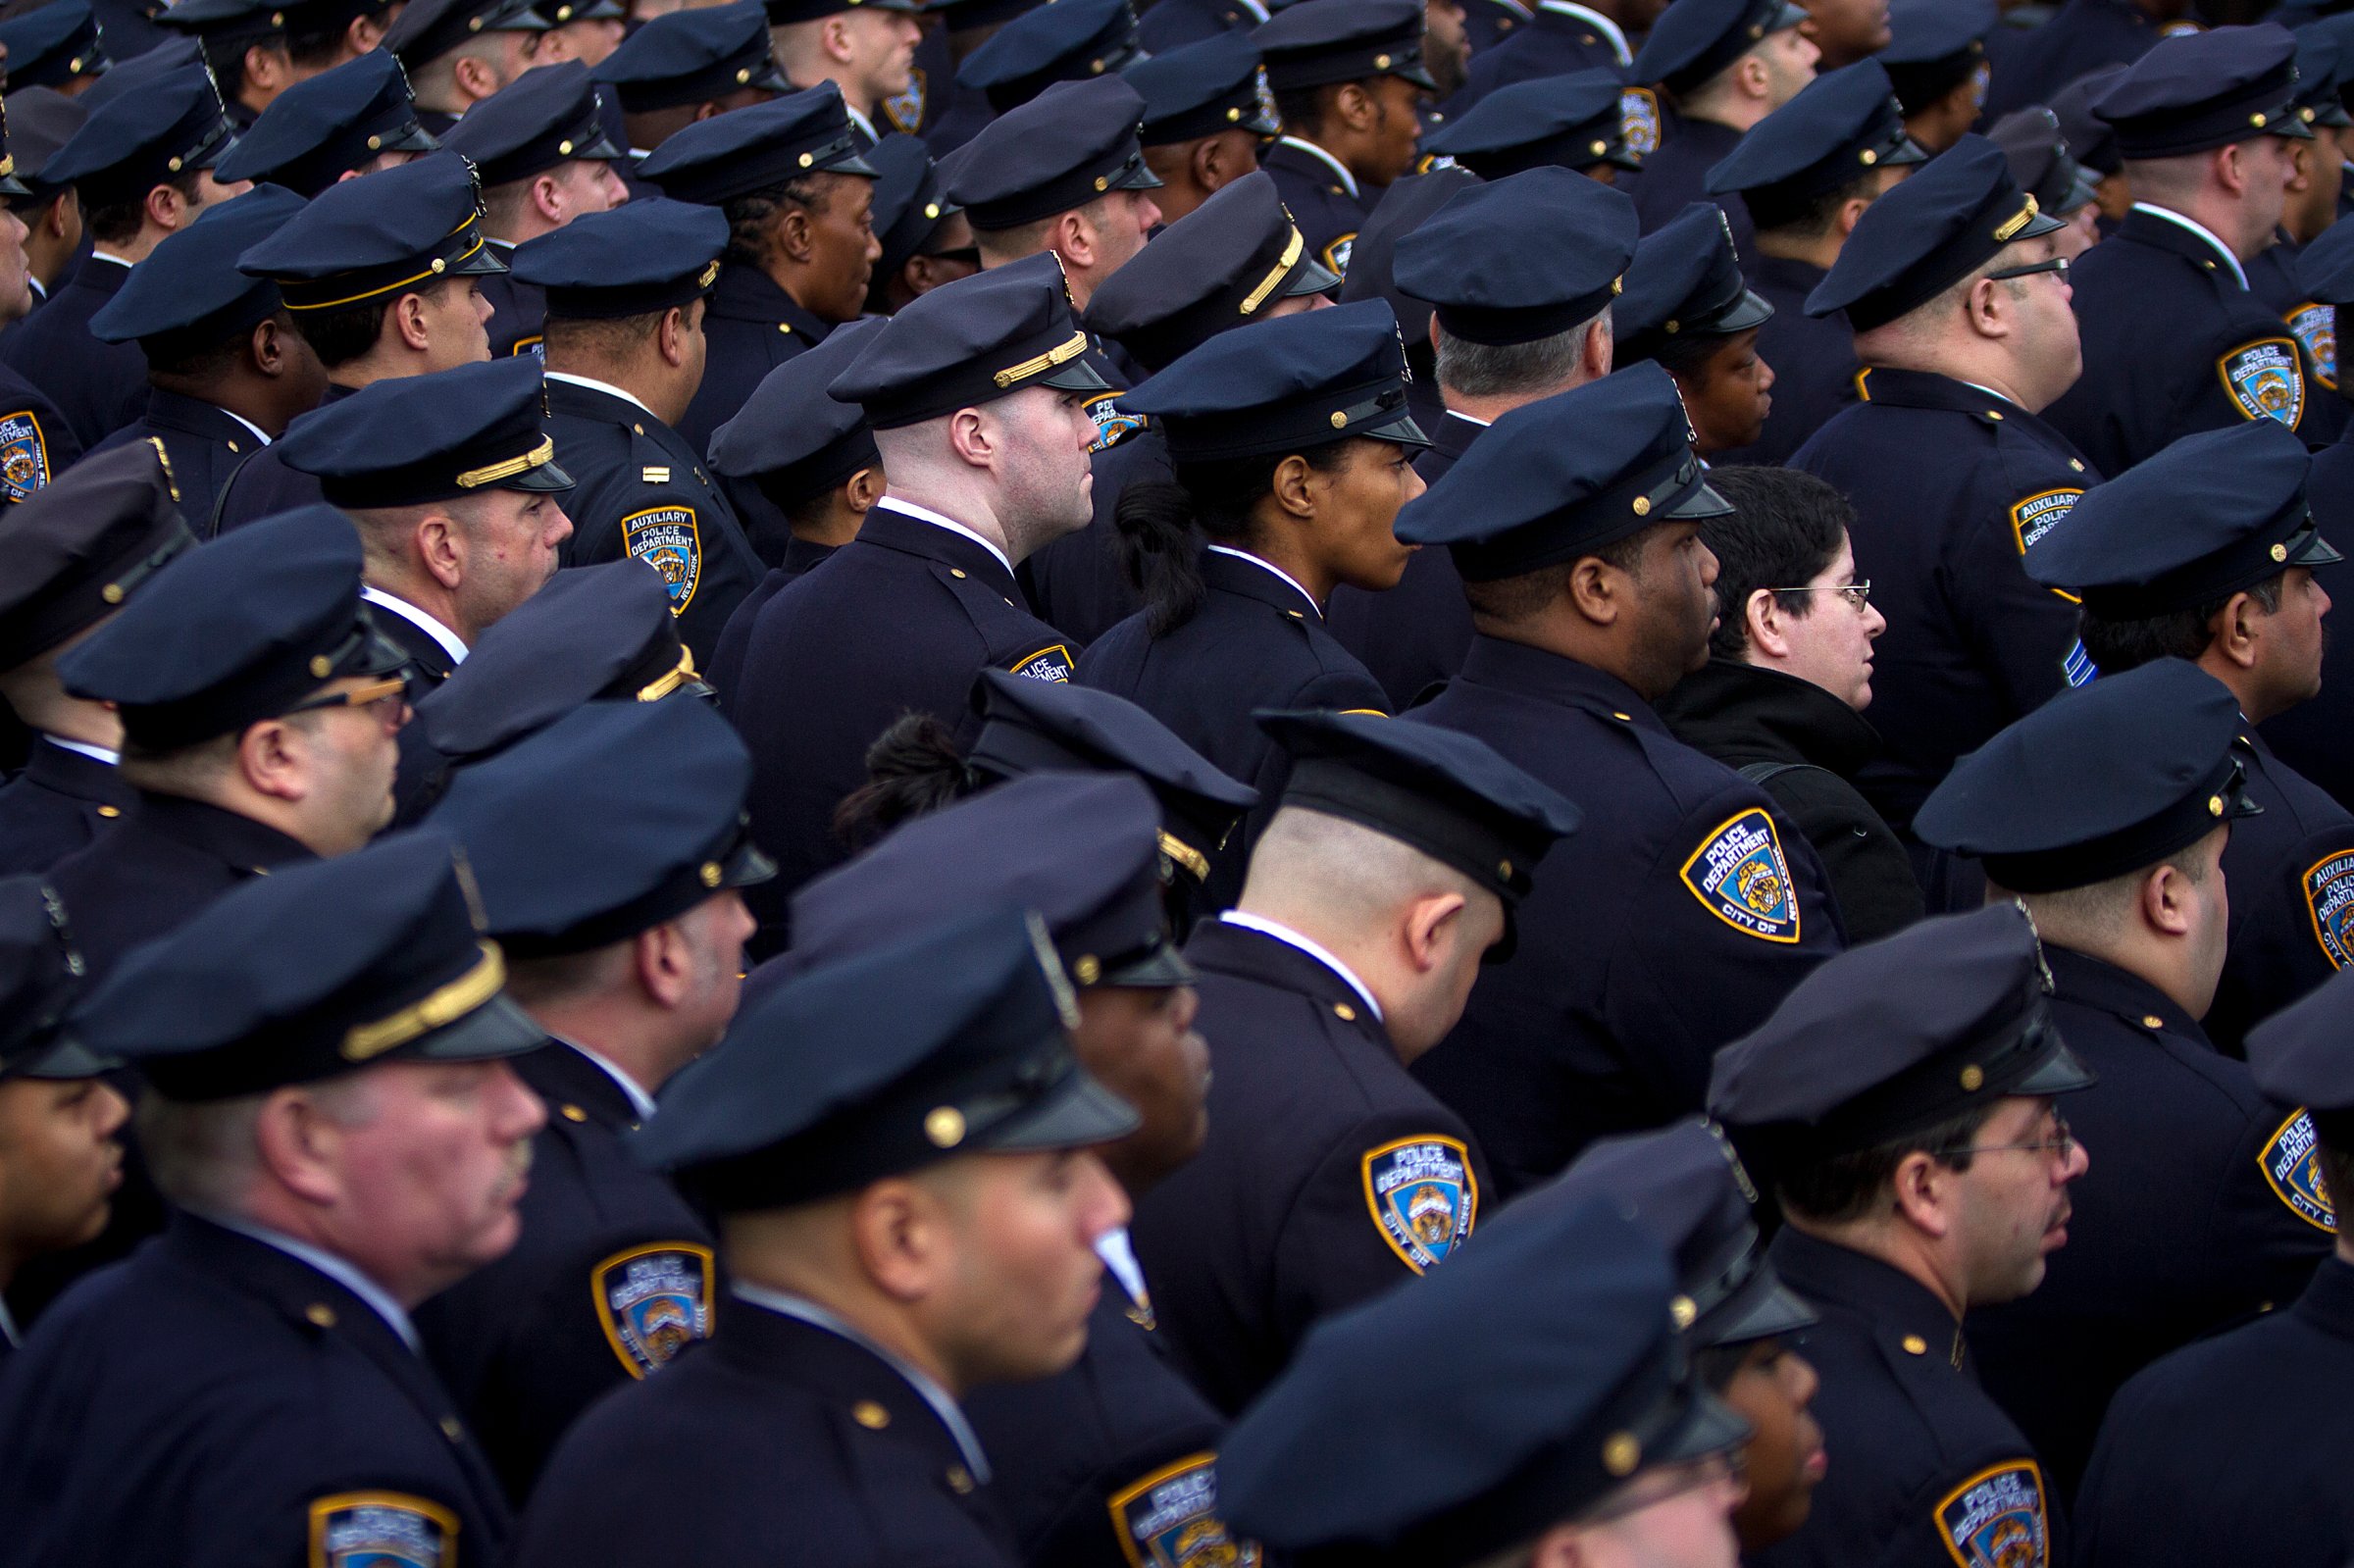 Police officers from the 84th Precinct listen during the funeral for slain New York Police Department officer Liu in the Brooklyn borough of New York